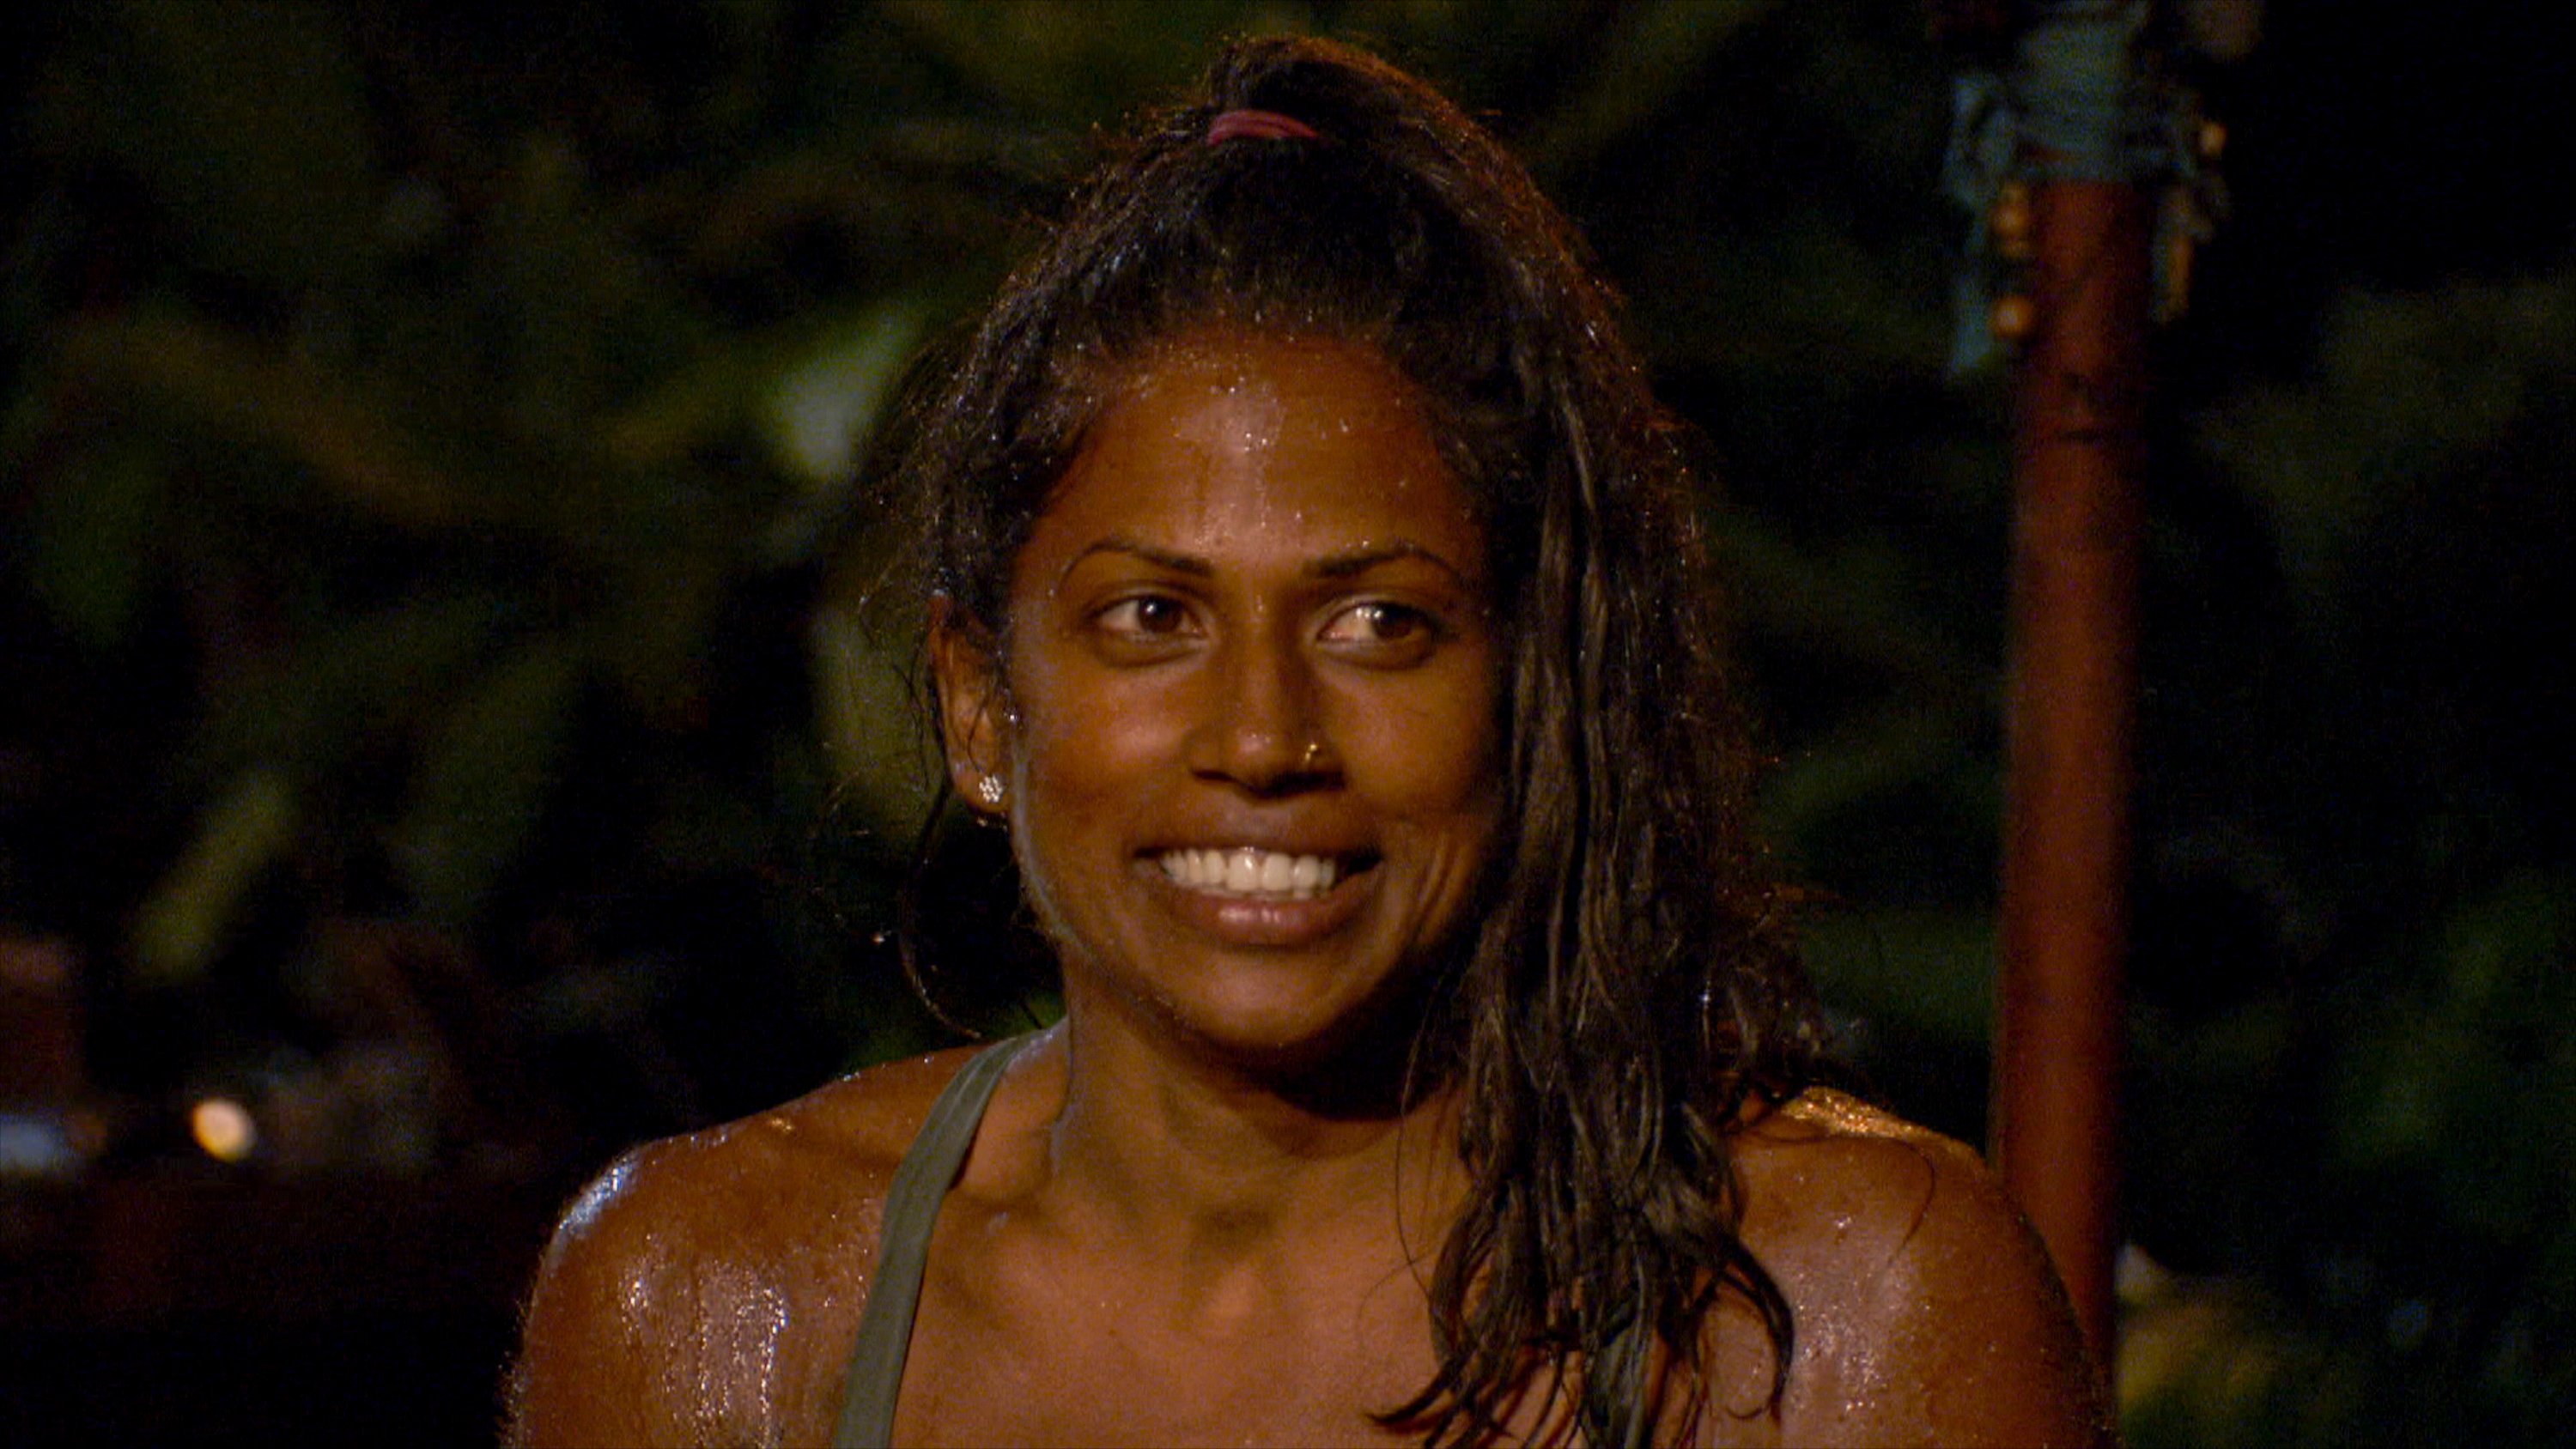 Natalie Anderson at Tribal Council on the three-hour season finale episode of 'Survivor: Winners at War' 